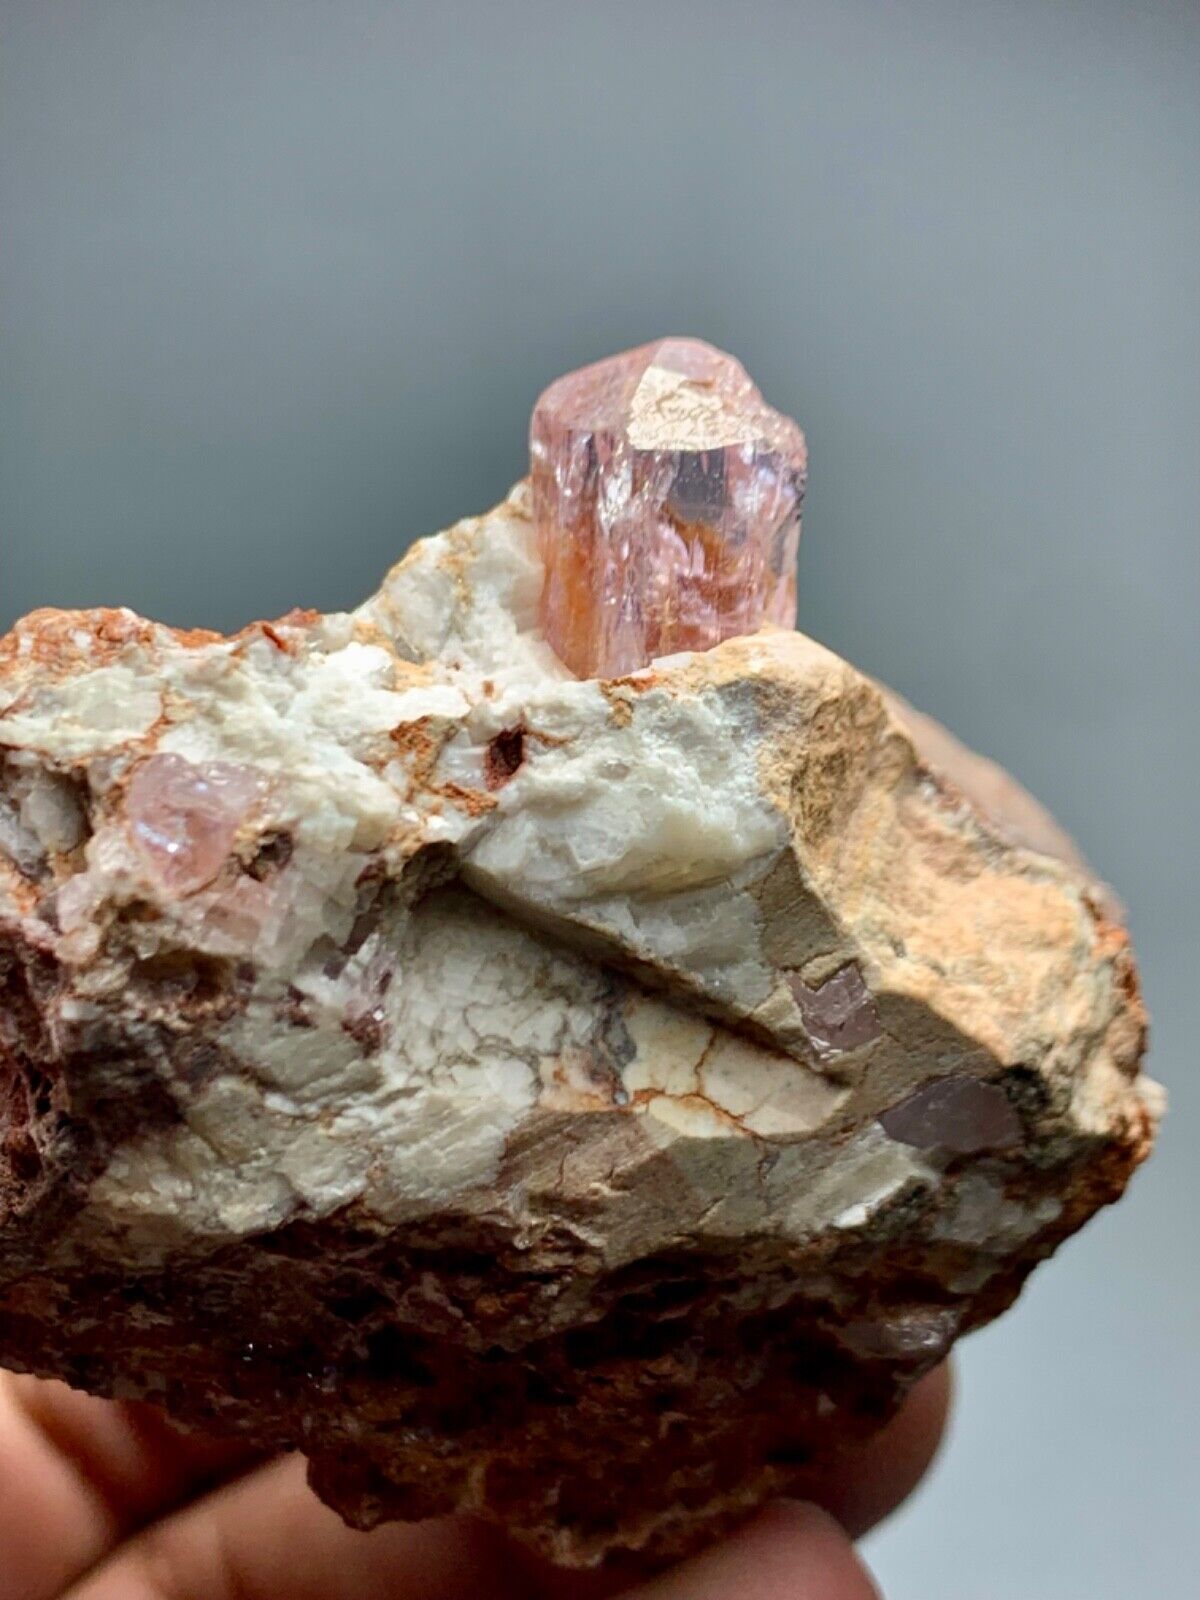 587 Cts Beautiful Terminated Pink Katlang  Topaz Crystal specimen From Pakistan